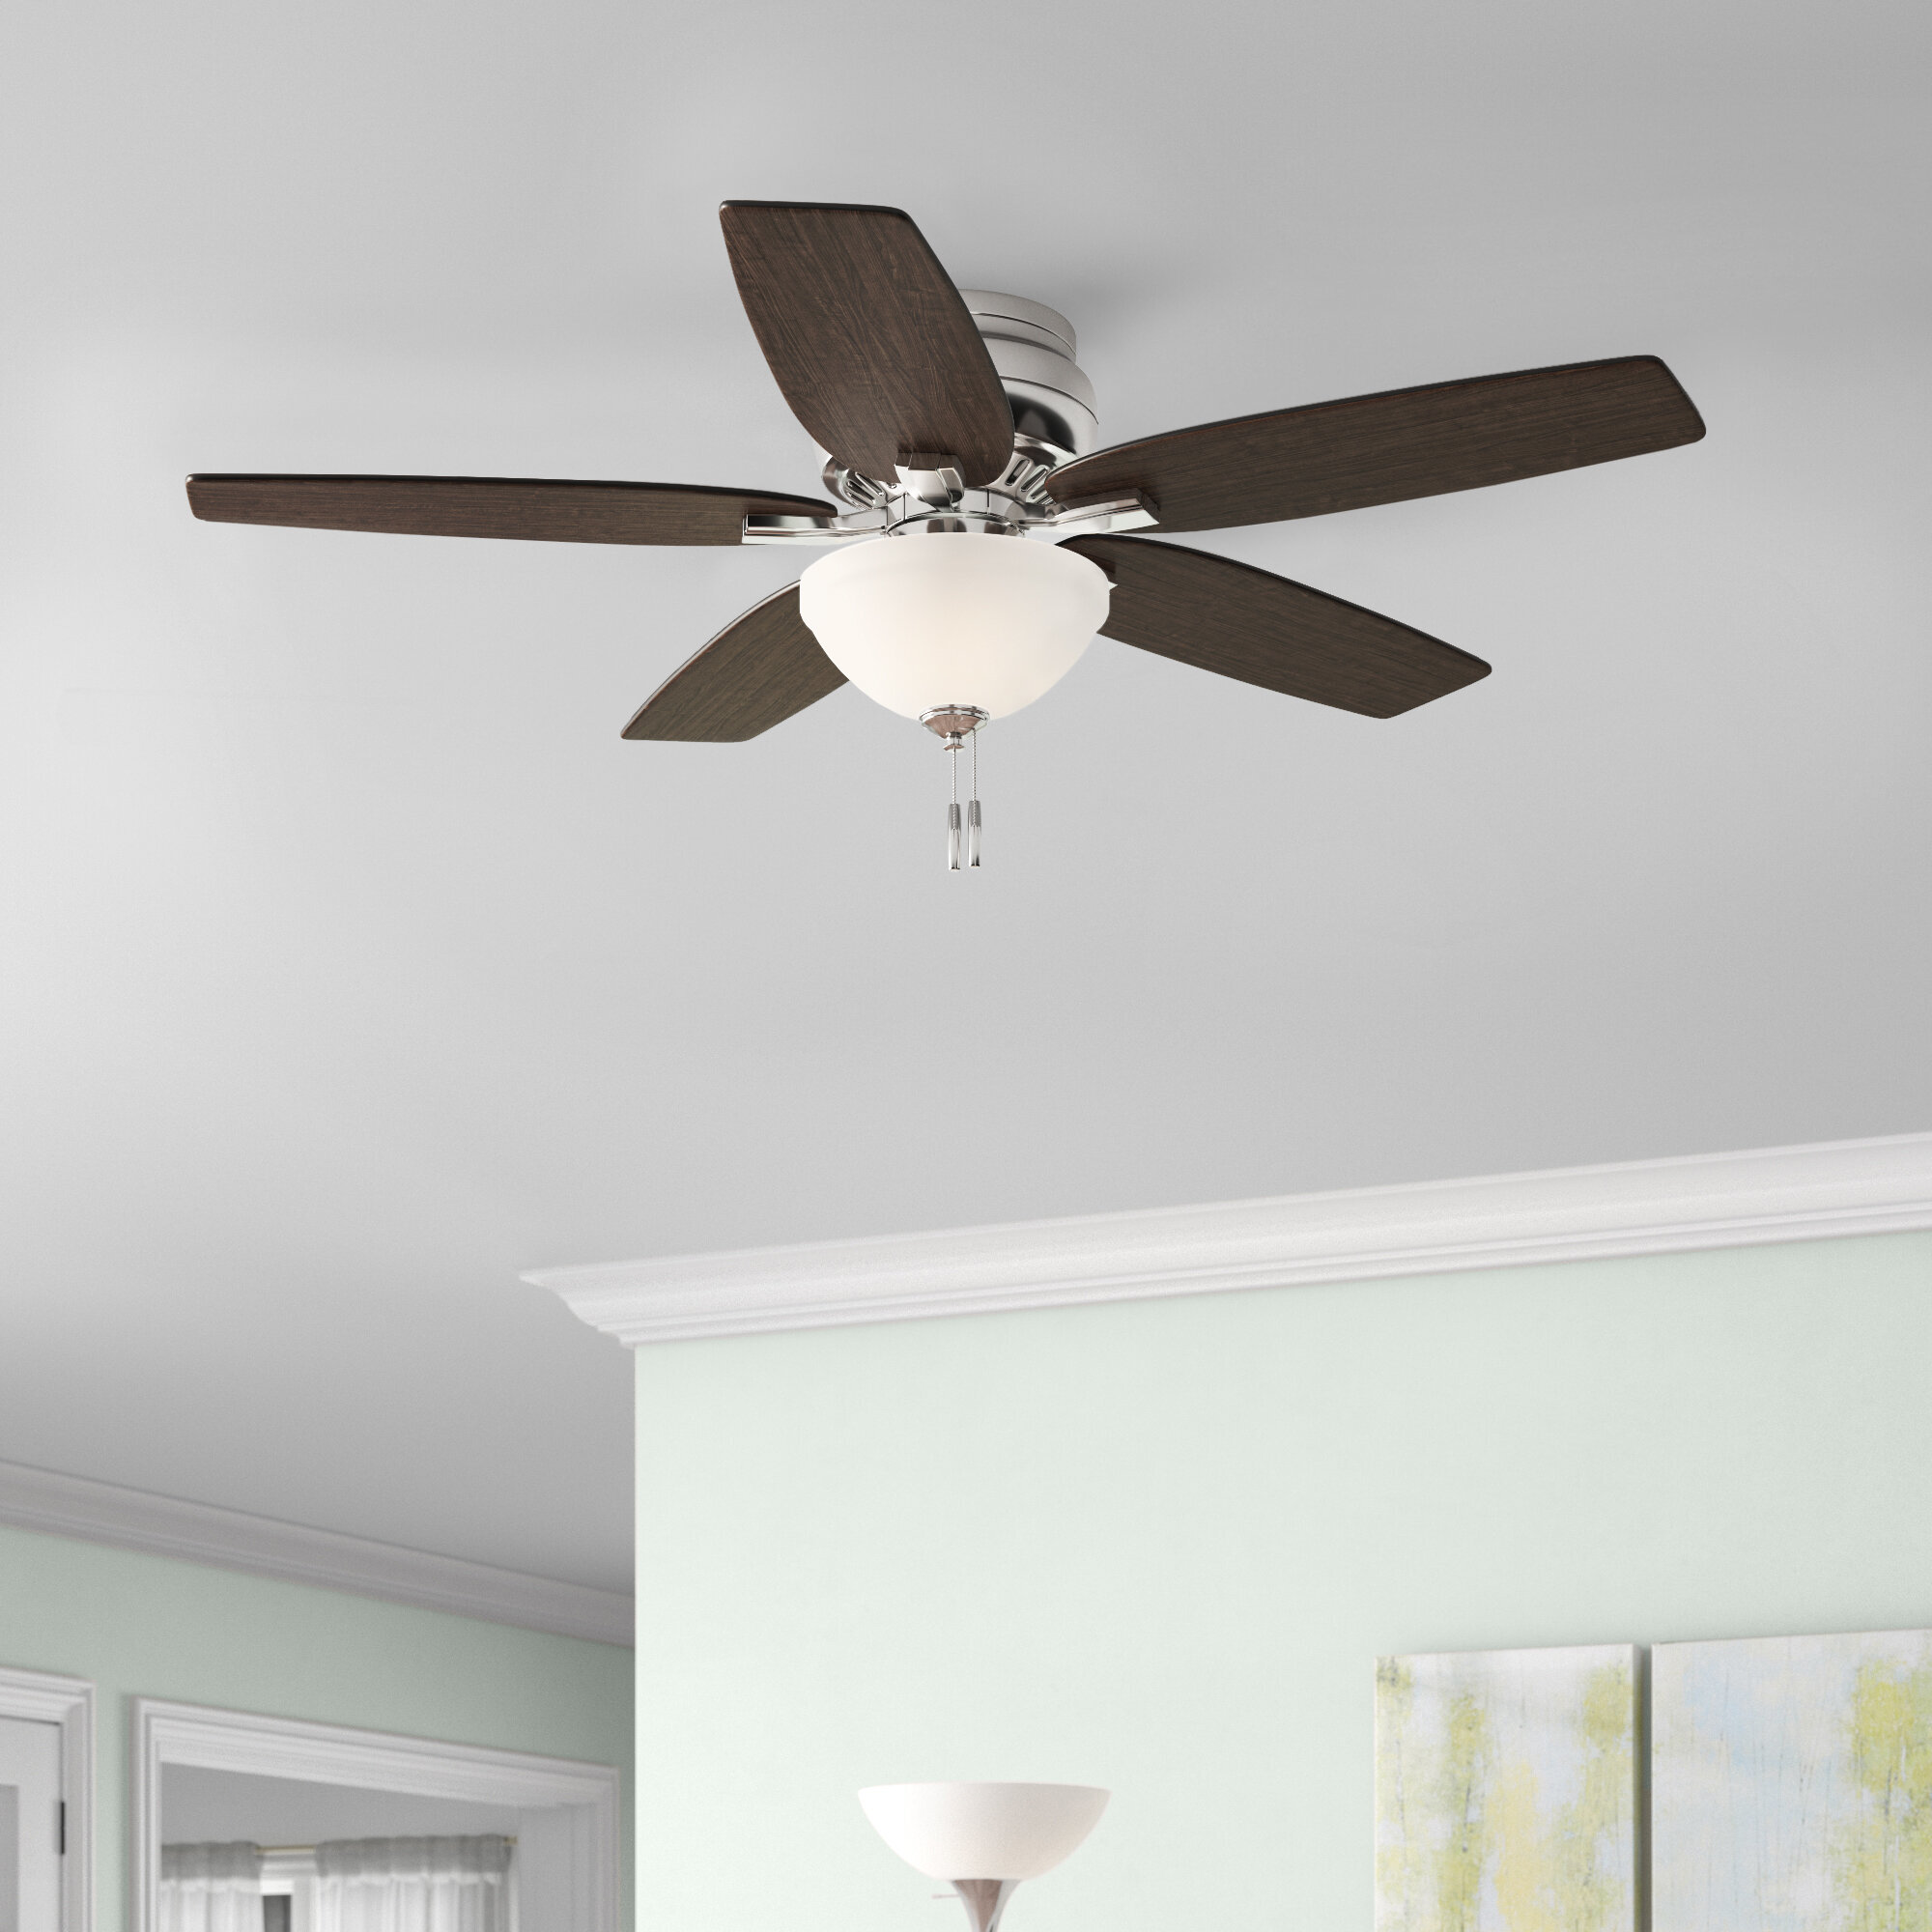 Hunter Fan 42 5 Blade Flush Mount Ceiling Fan With Pull Chain And Light Kit Included Reviews Wayfair